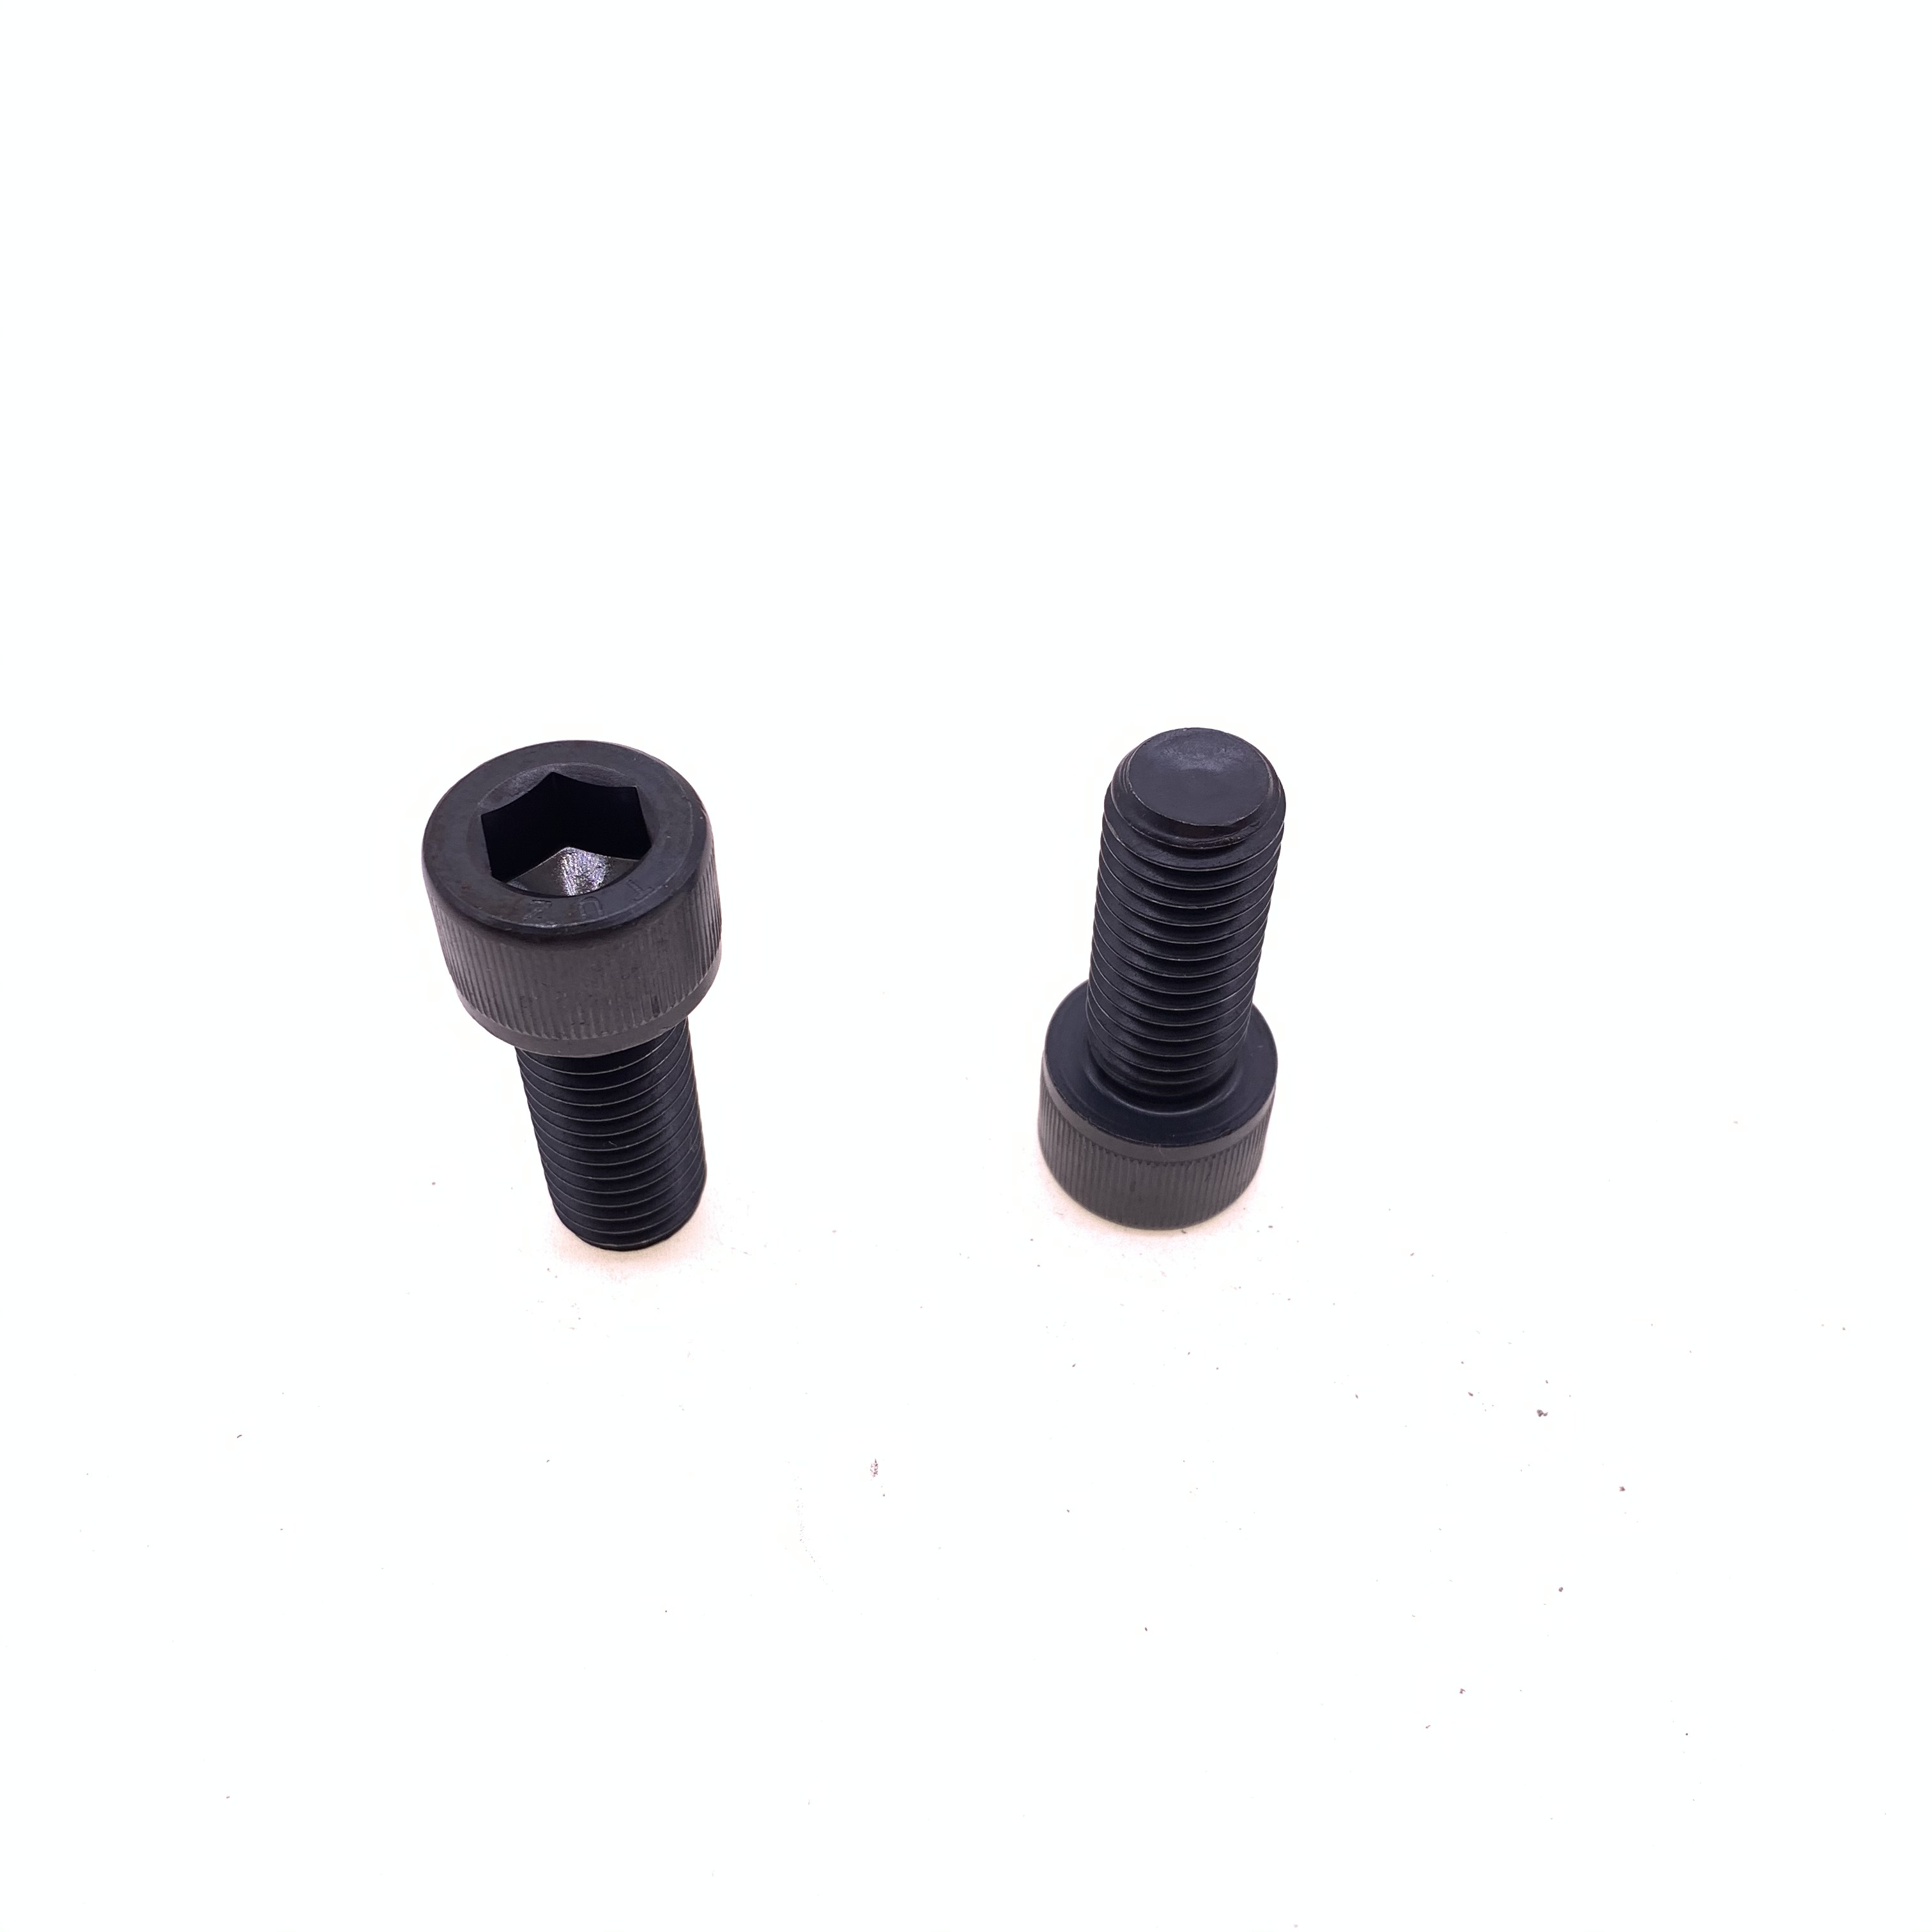 Ingersoll Rand Spare Parts Bolt 95013785